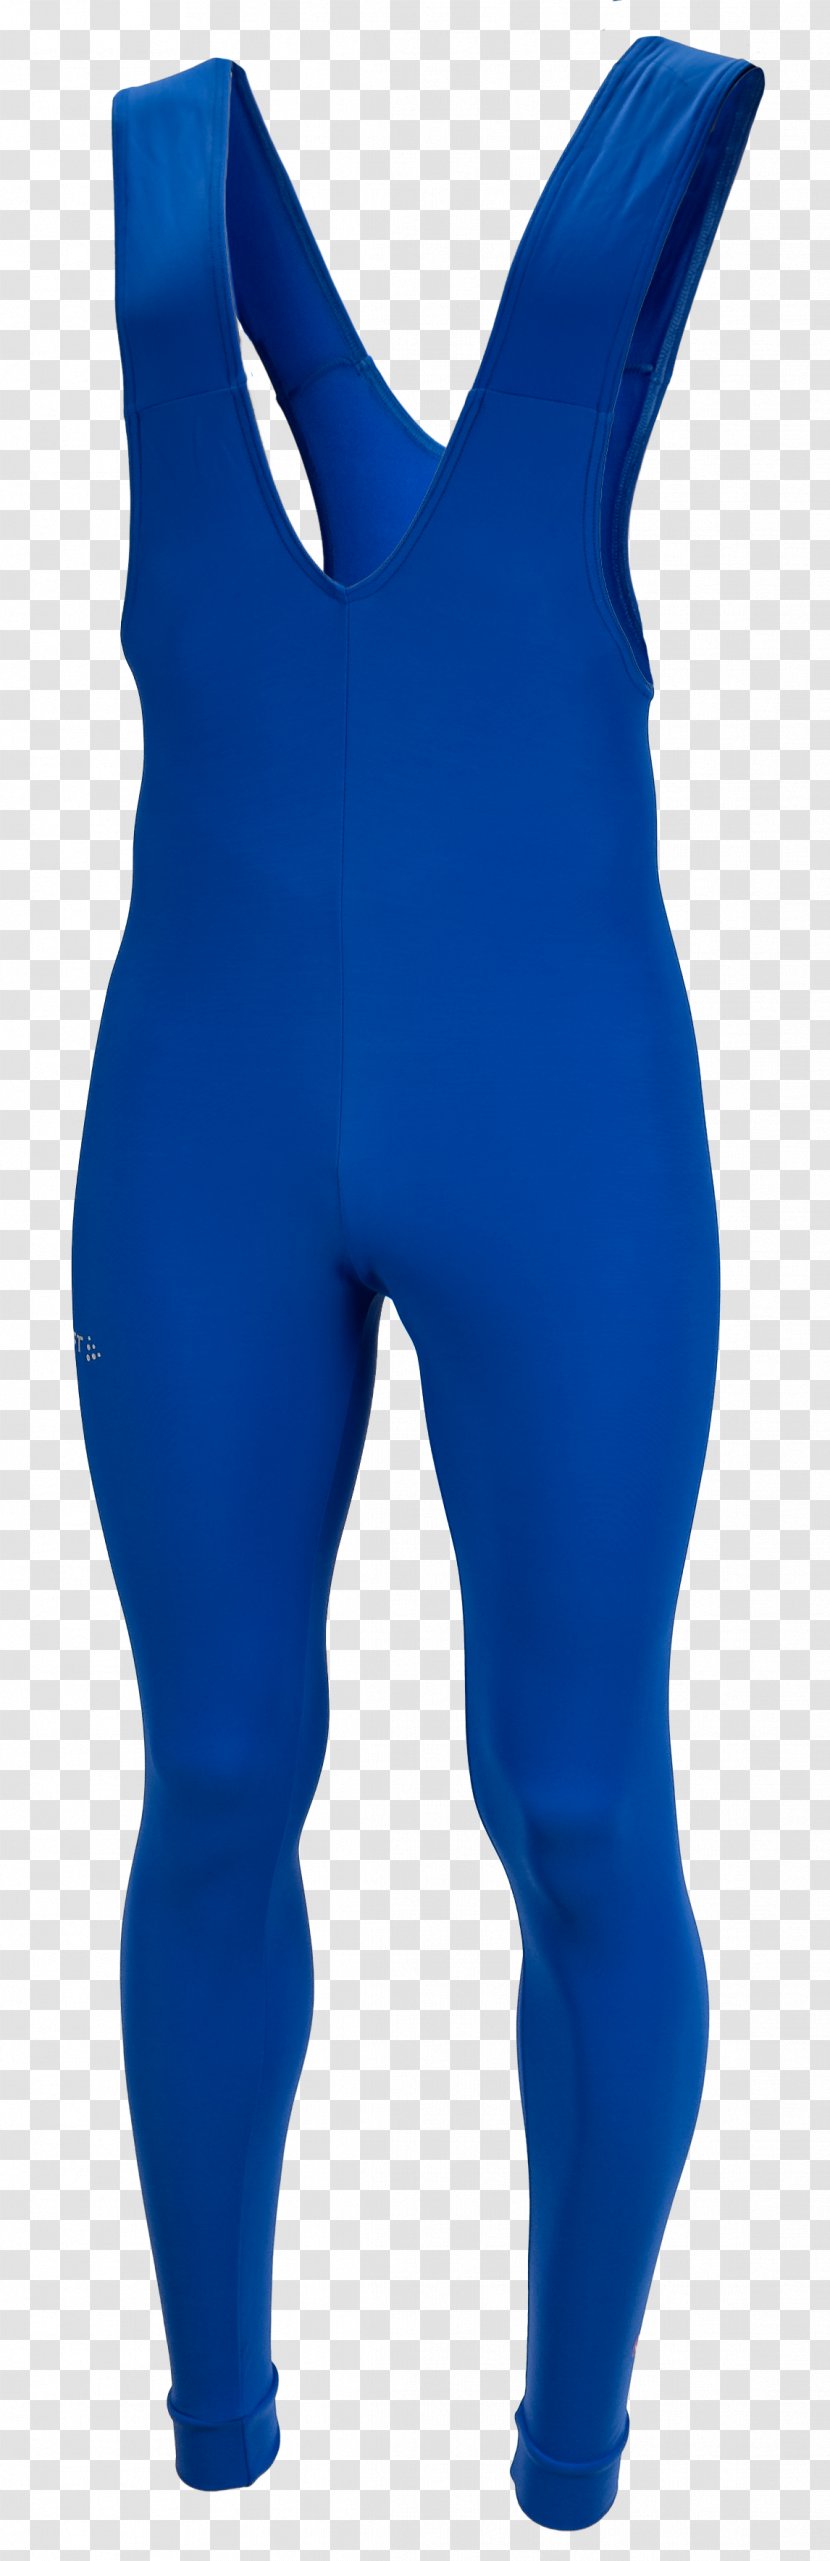 Wetsuit - Blue - Tights Transparent PNG